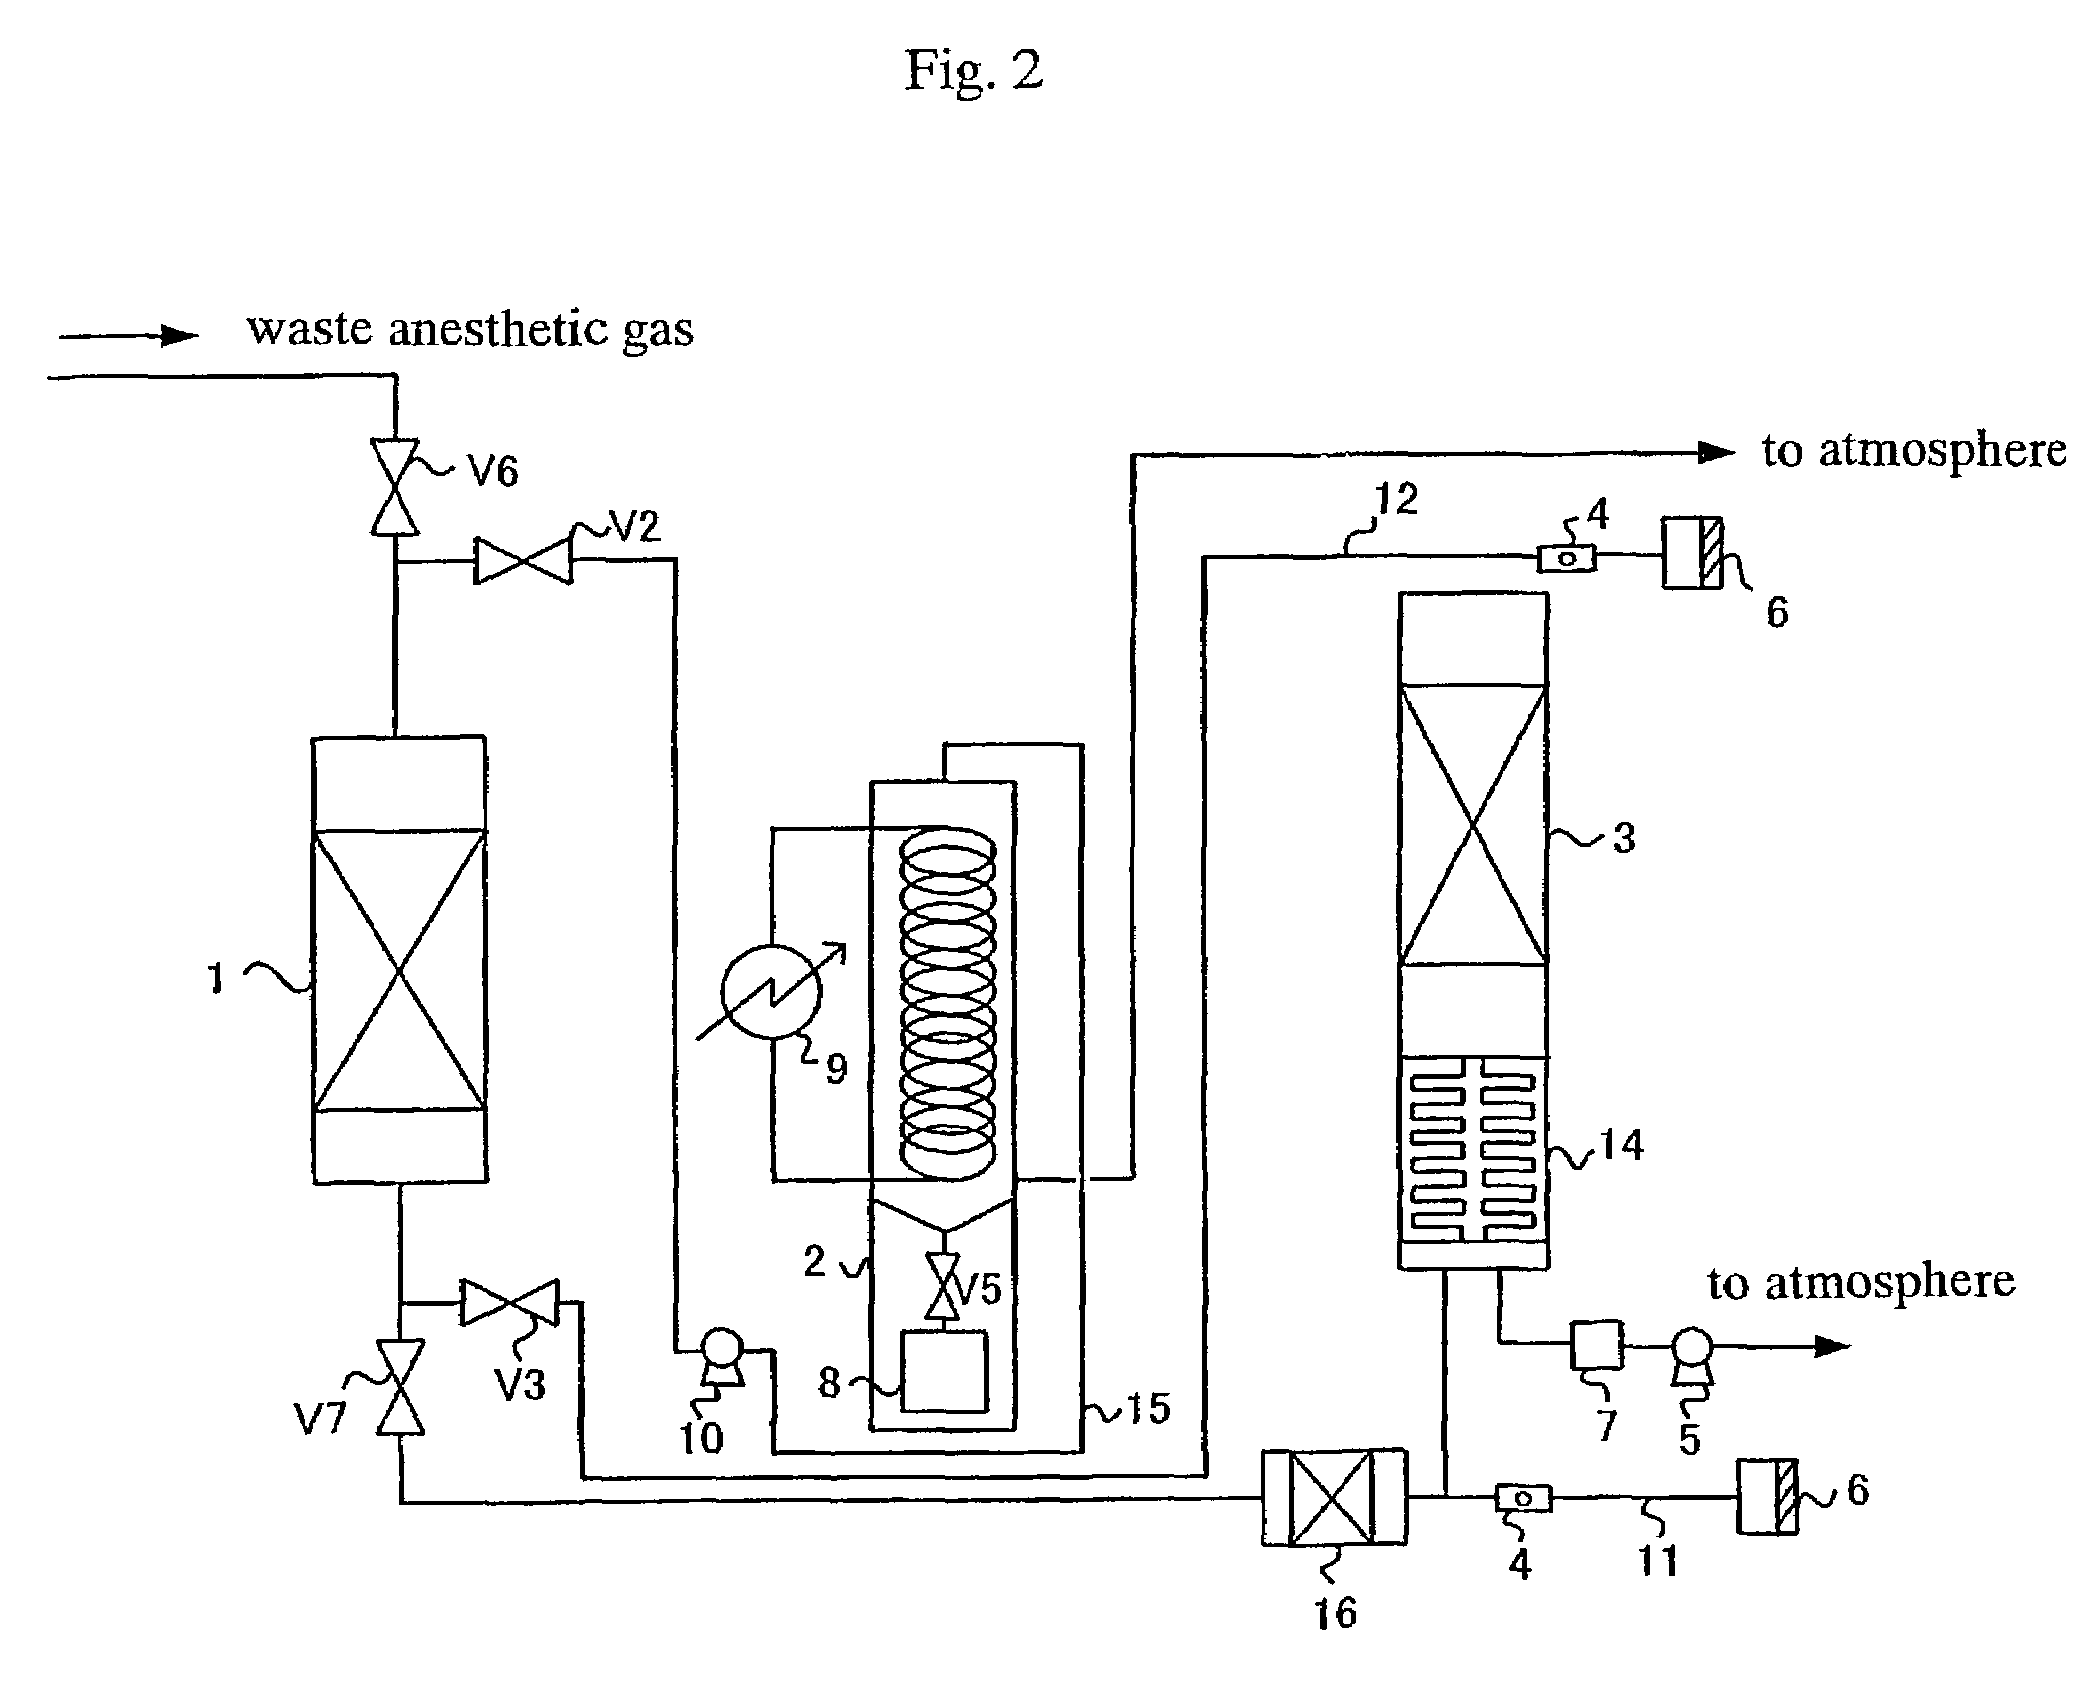 Process for treating waste anesthetic gas